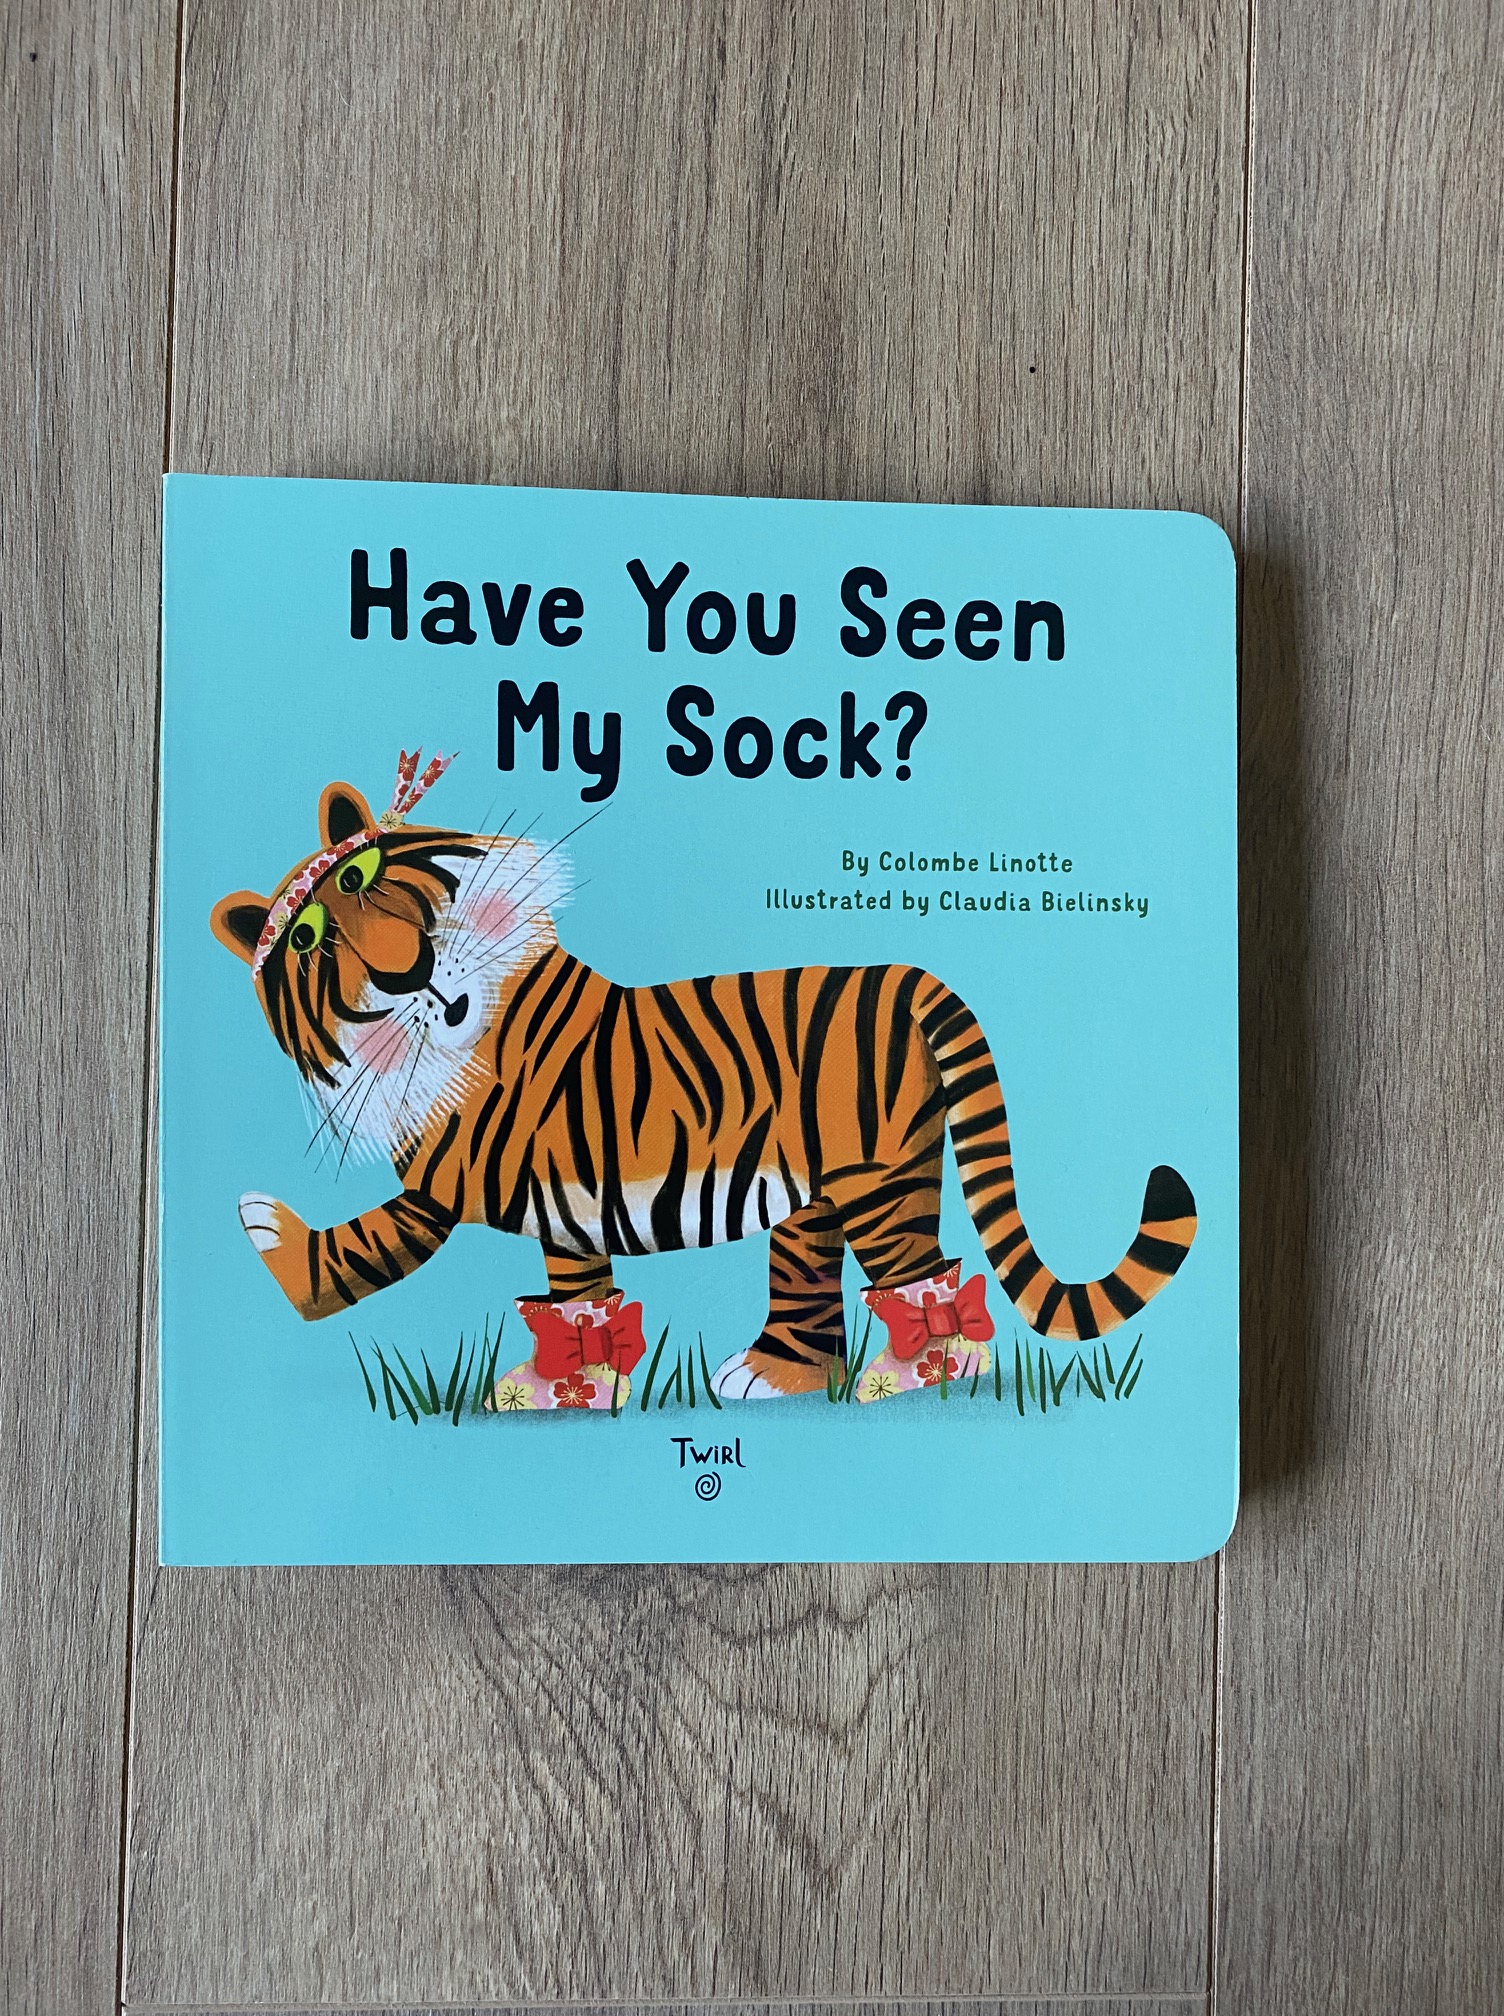 Have you seen my sock ? Colombe Linotte author